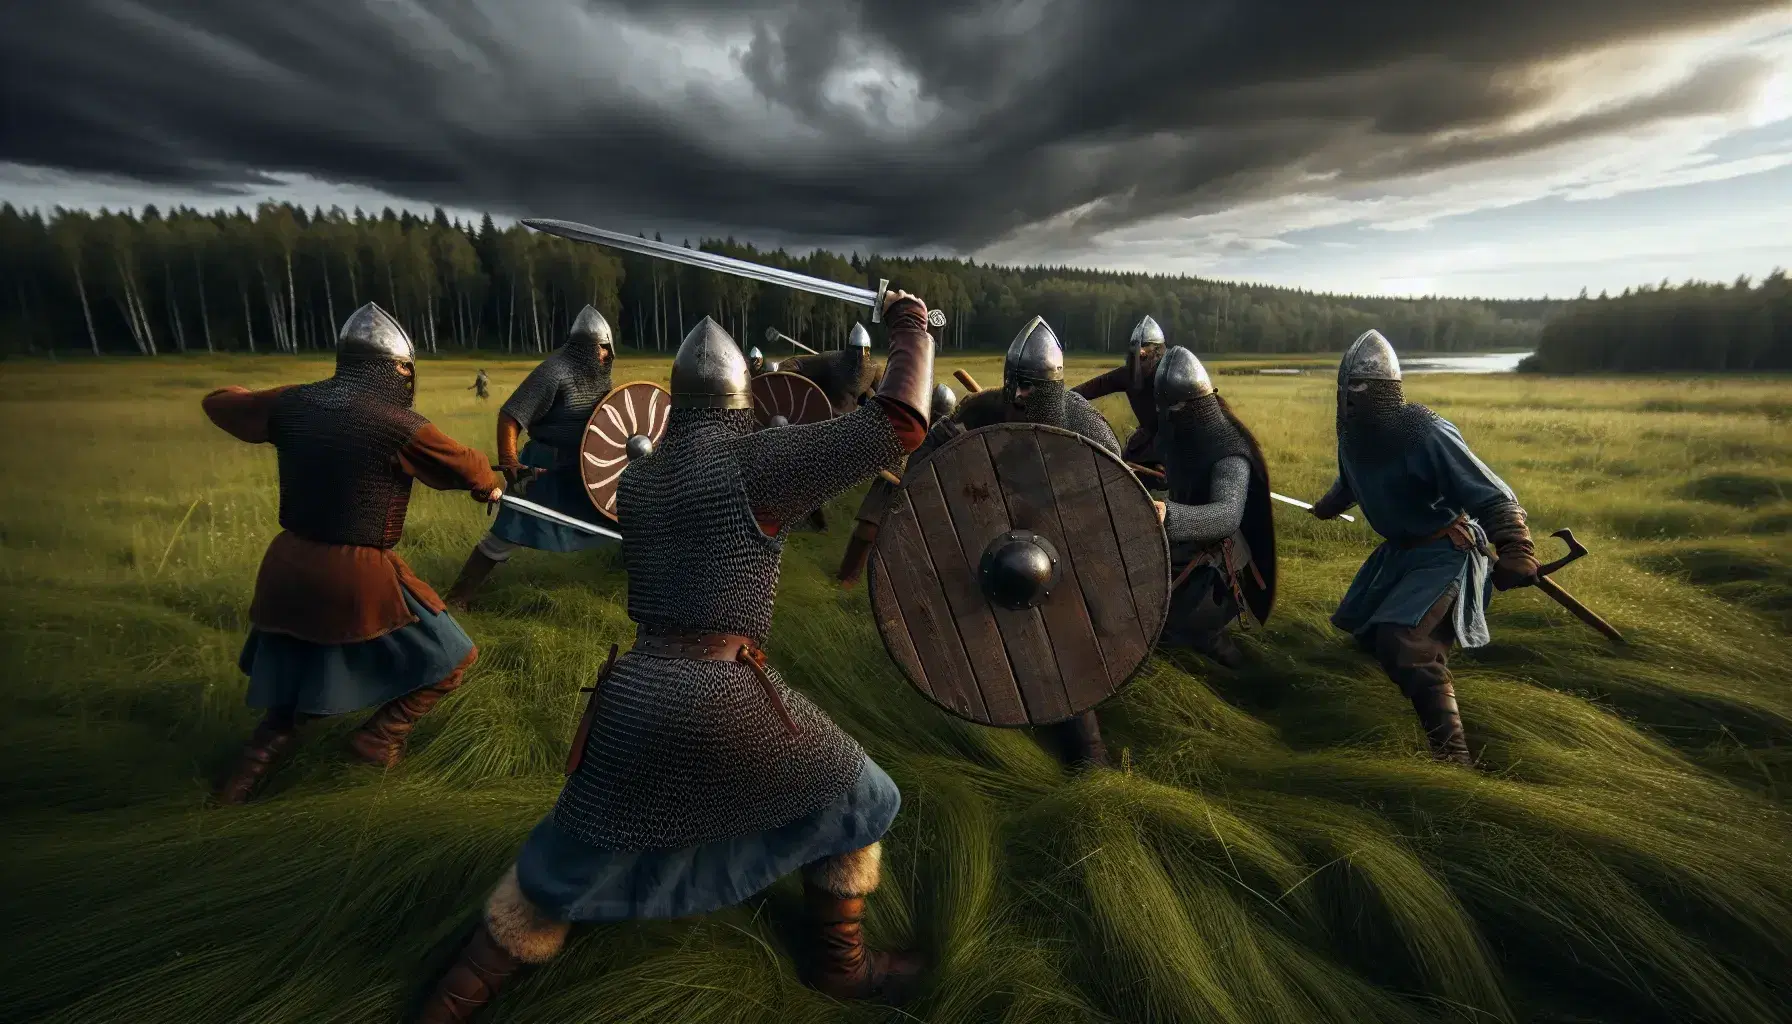 Viking warriors in chainmail train on a grassy field, with swords, shields, and spears, against a backdrop of a dark forest and stormy sky.